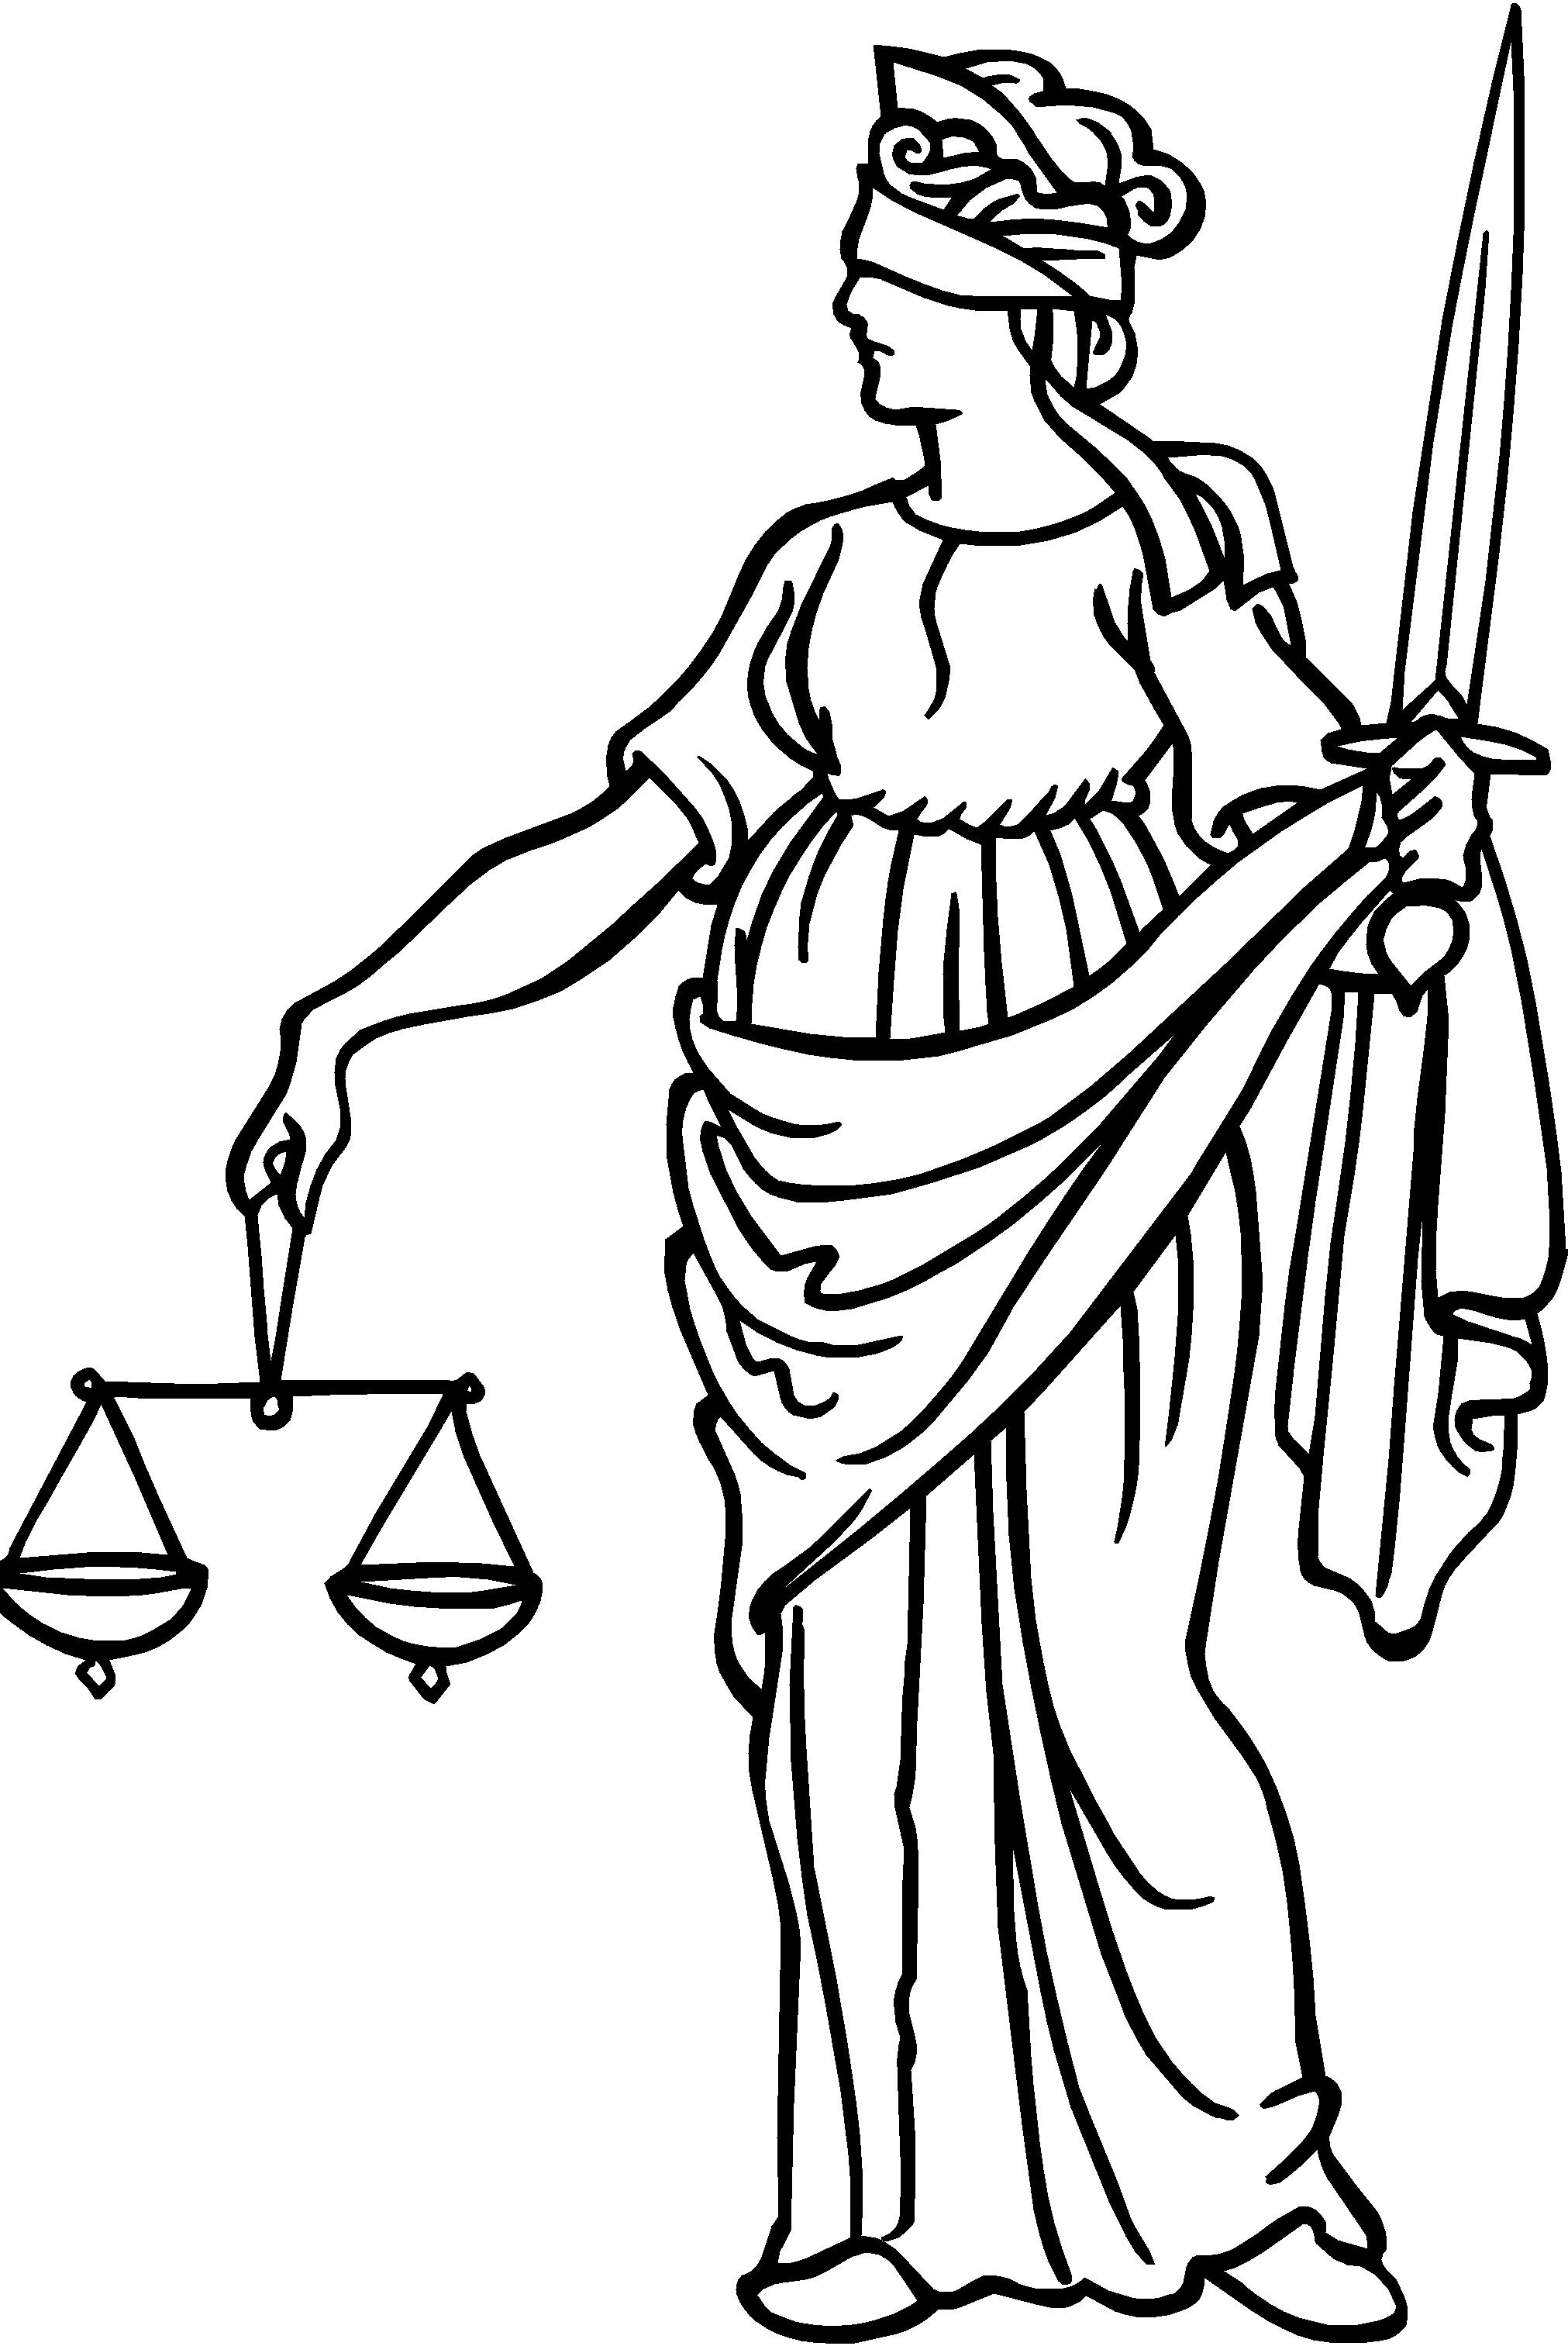 lady justice logo - get domain pictures - getdomainvids.